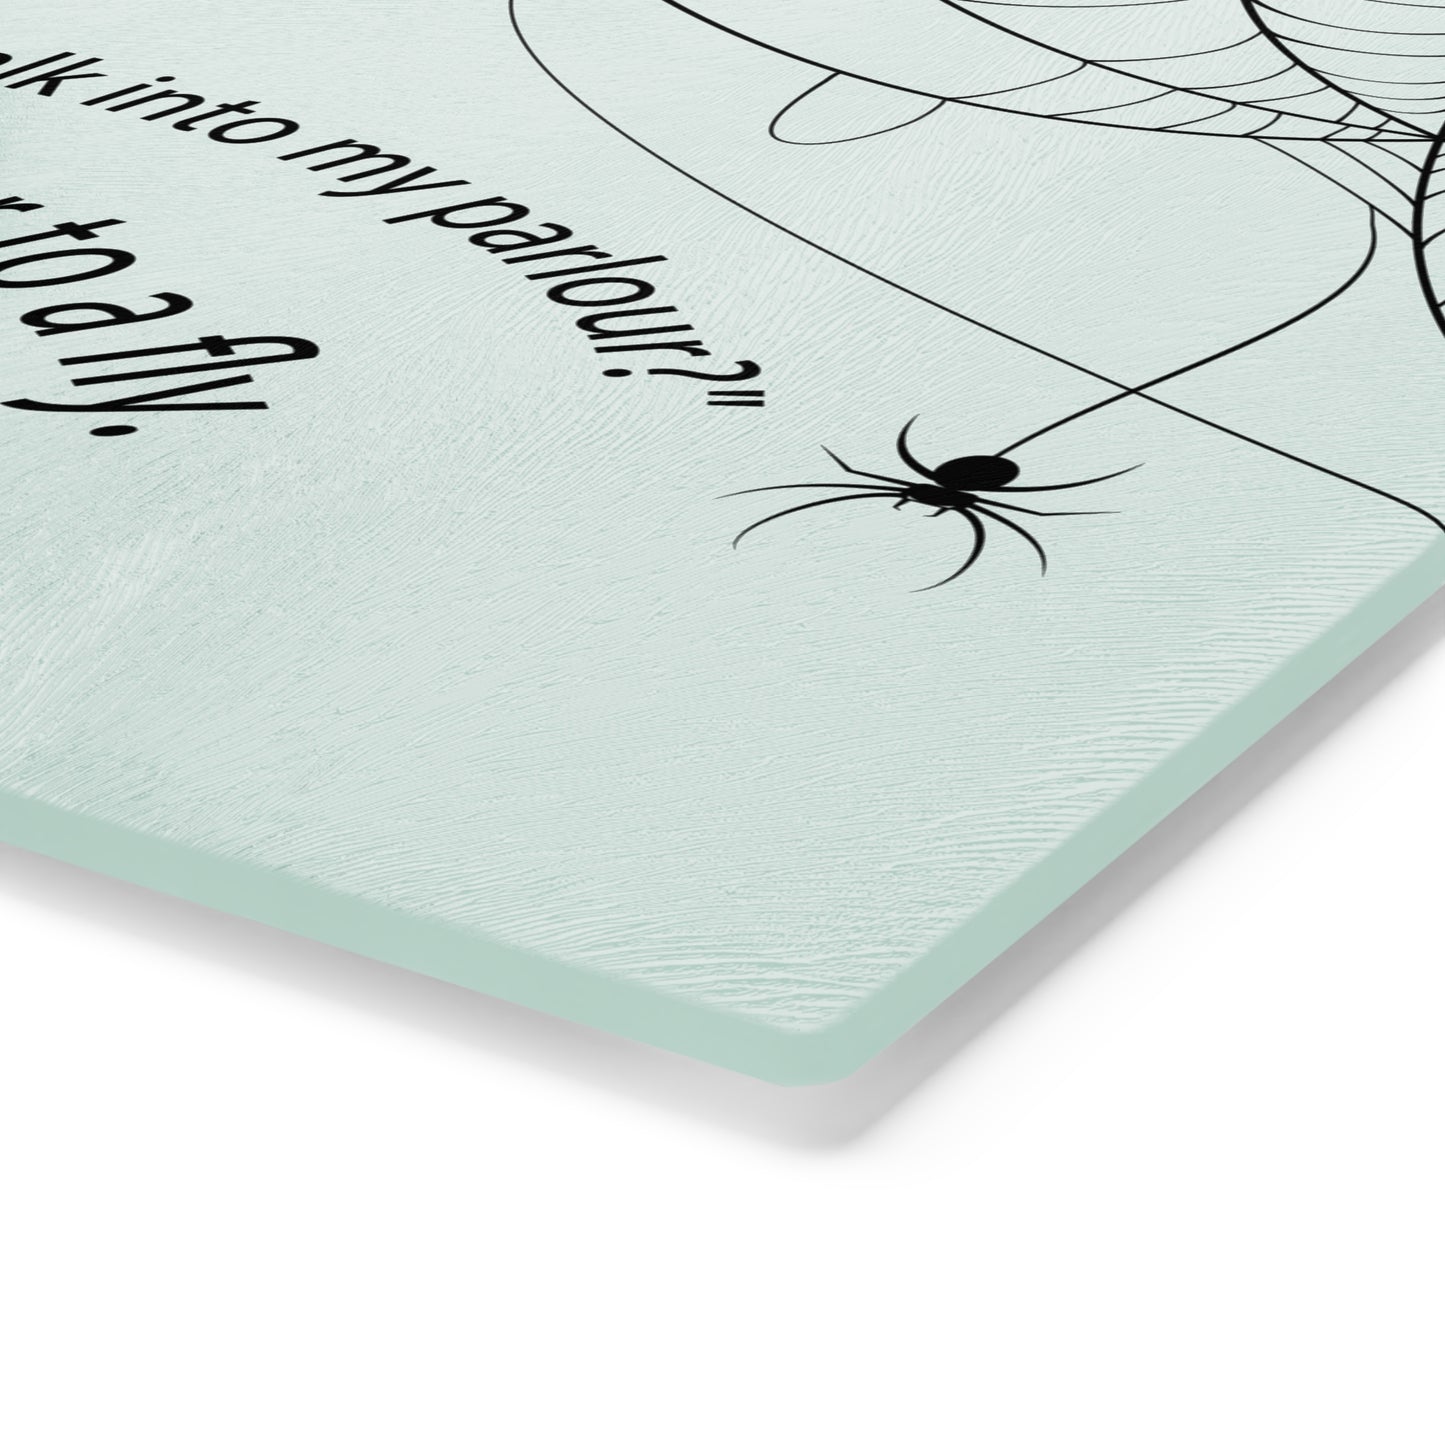 "Will You Walk Into My Parlor?" Cutting Board, Spider Web Pattern, Black on Mint Green Glass